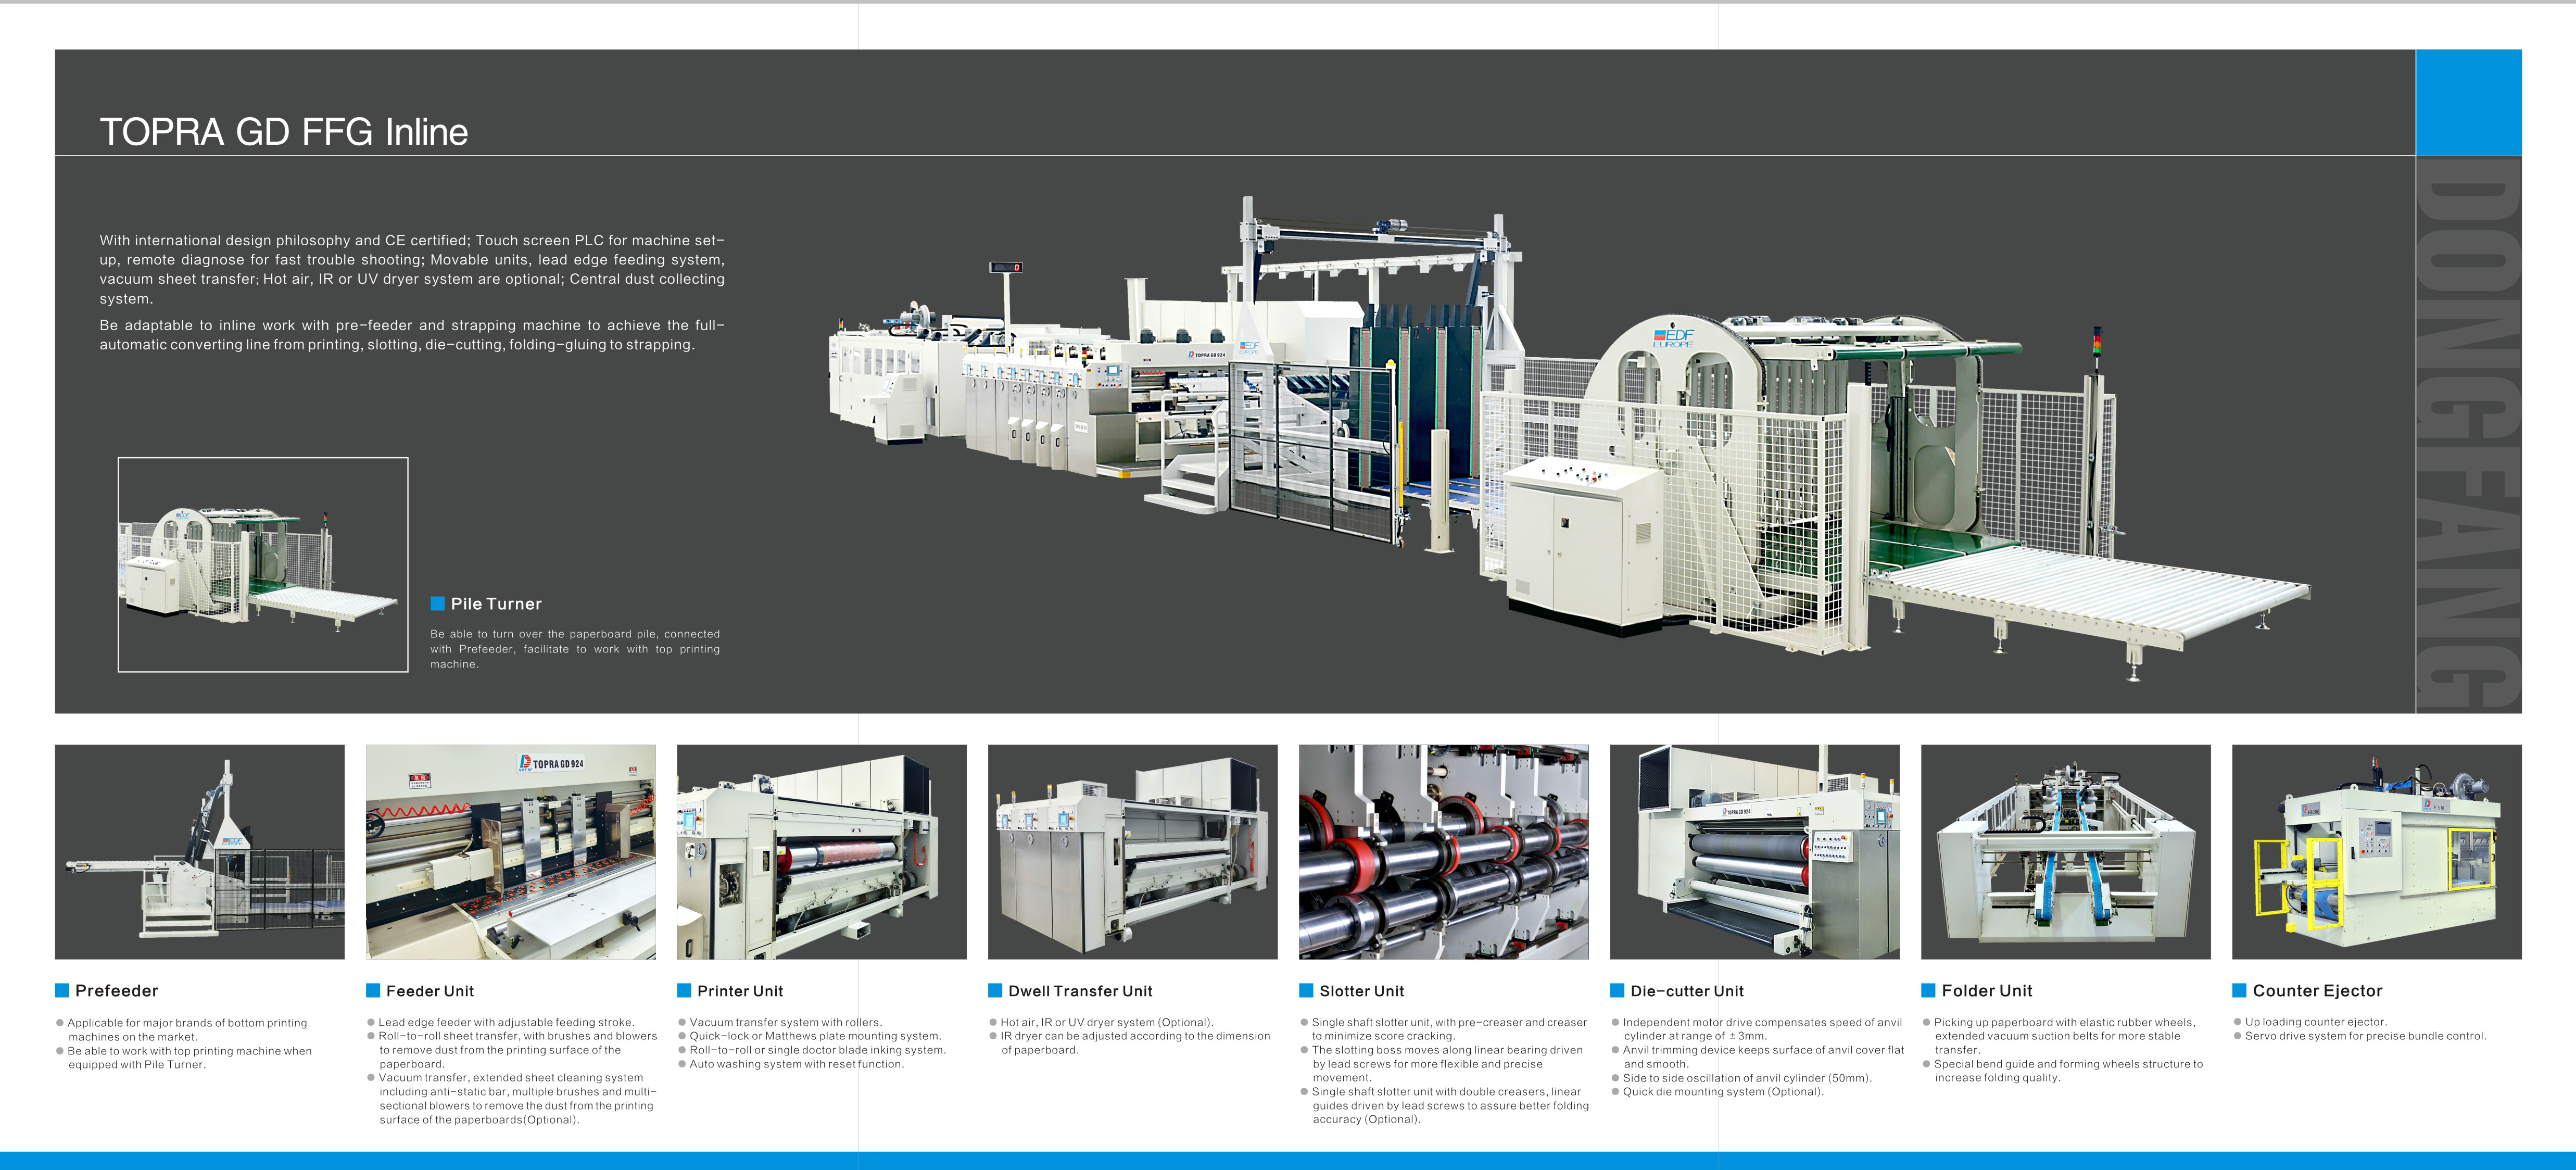 Learn more about the Topra GD Flexo Folder Gluer in the Dong Fang brochure.